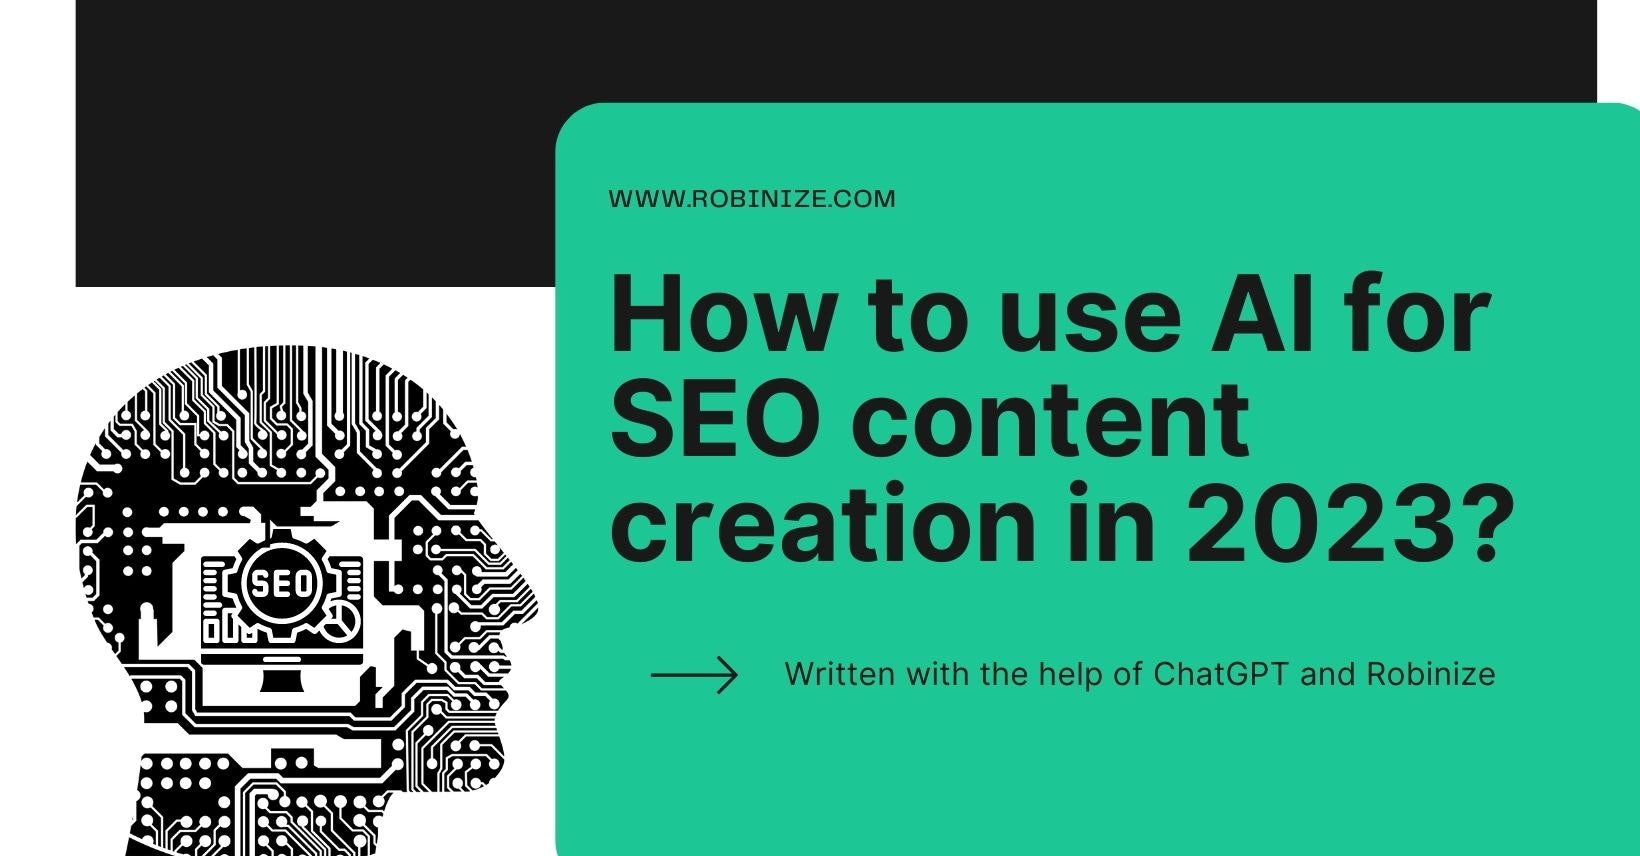 Cover Image for How to use AI for SEO content in 2023